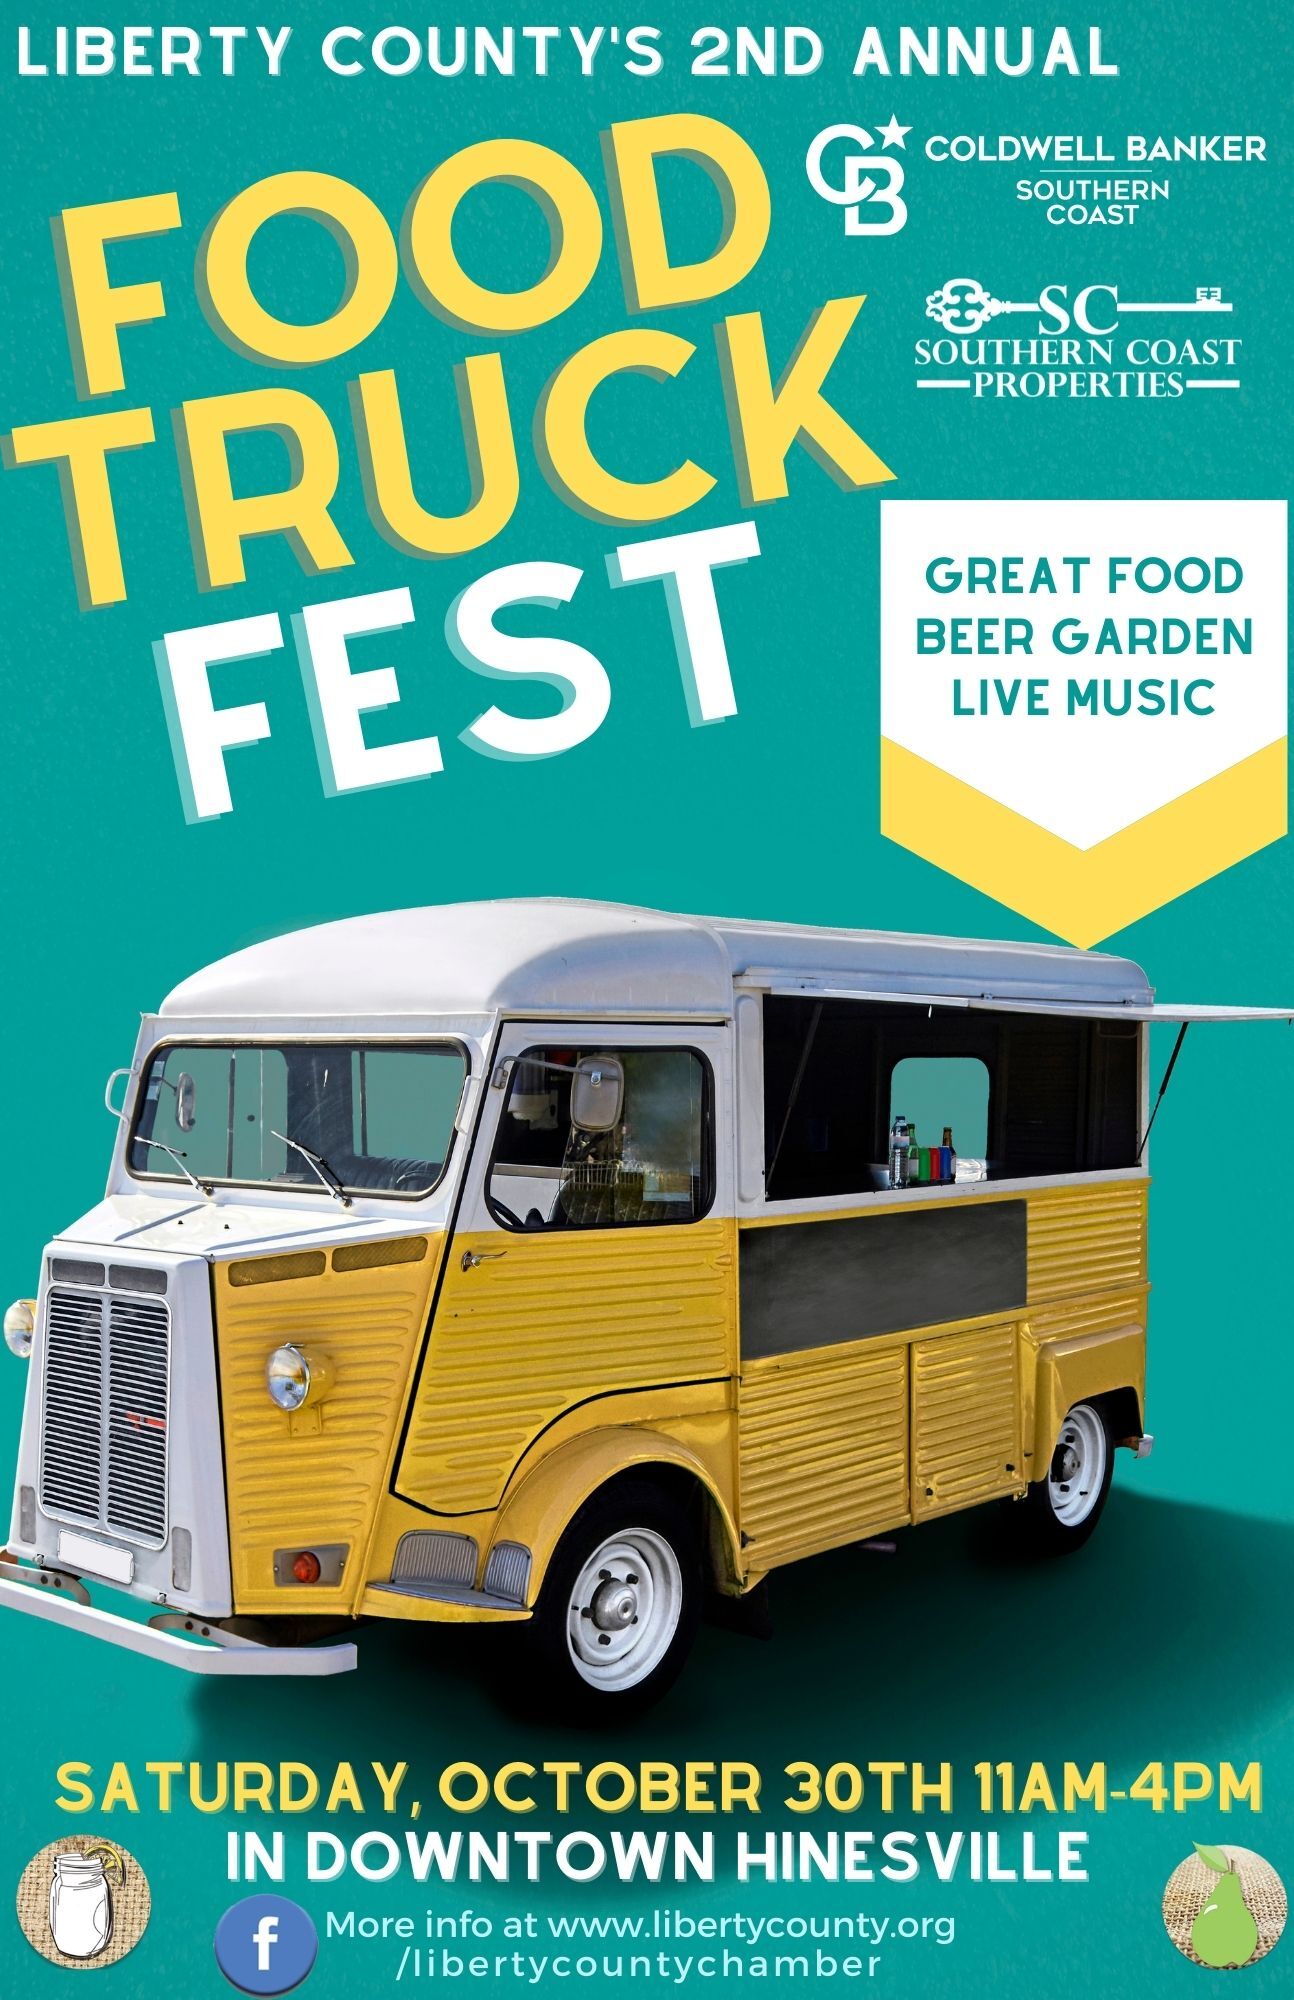 2nd Annual Liberty County Food Truck Festival